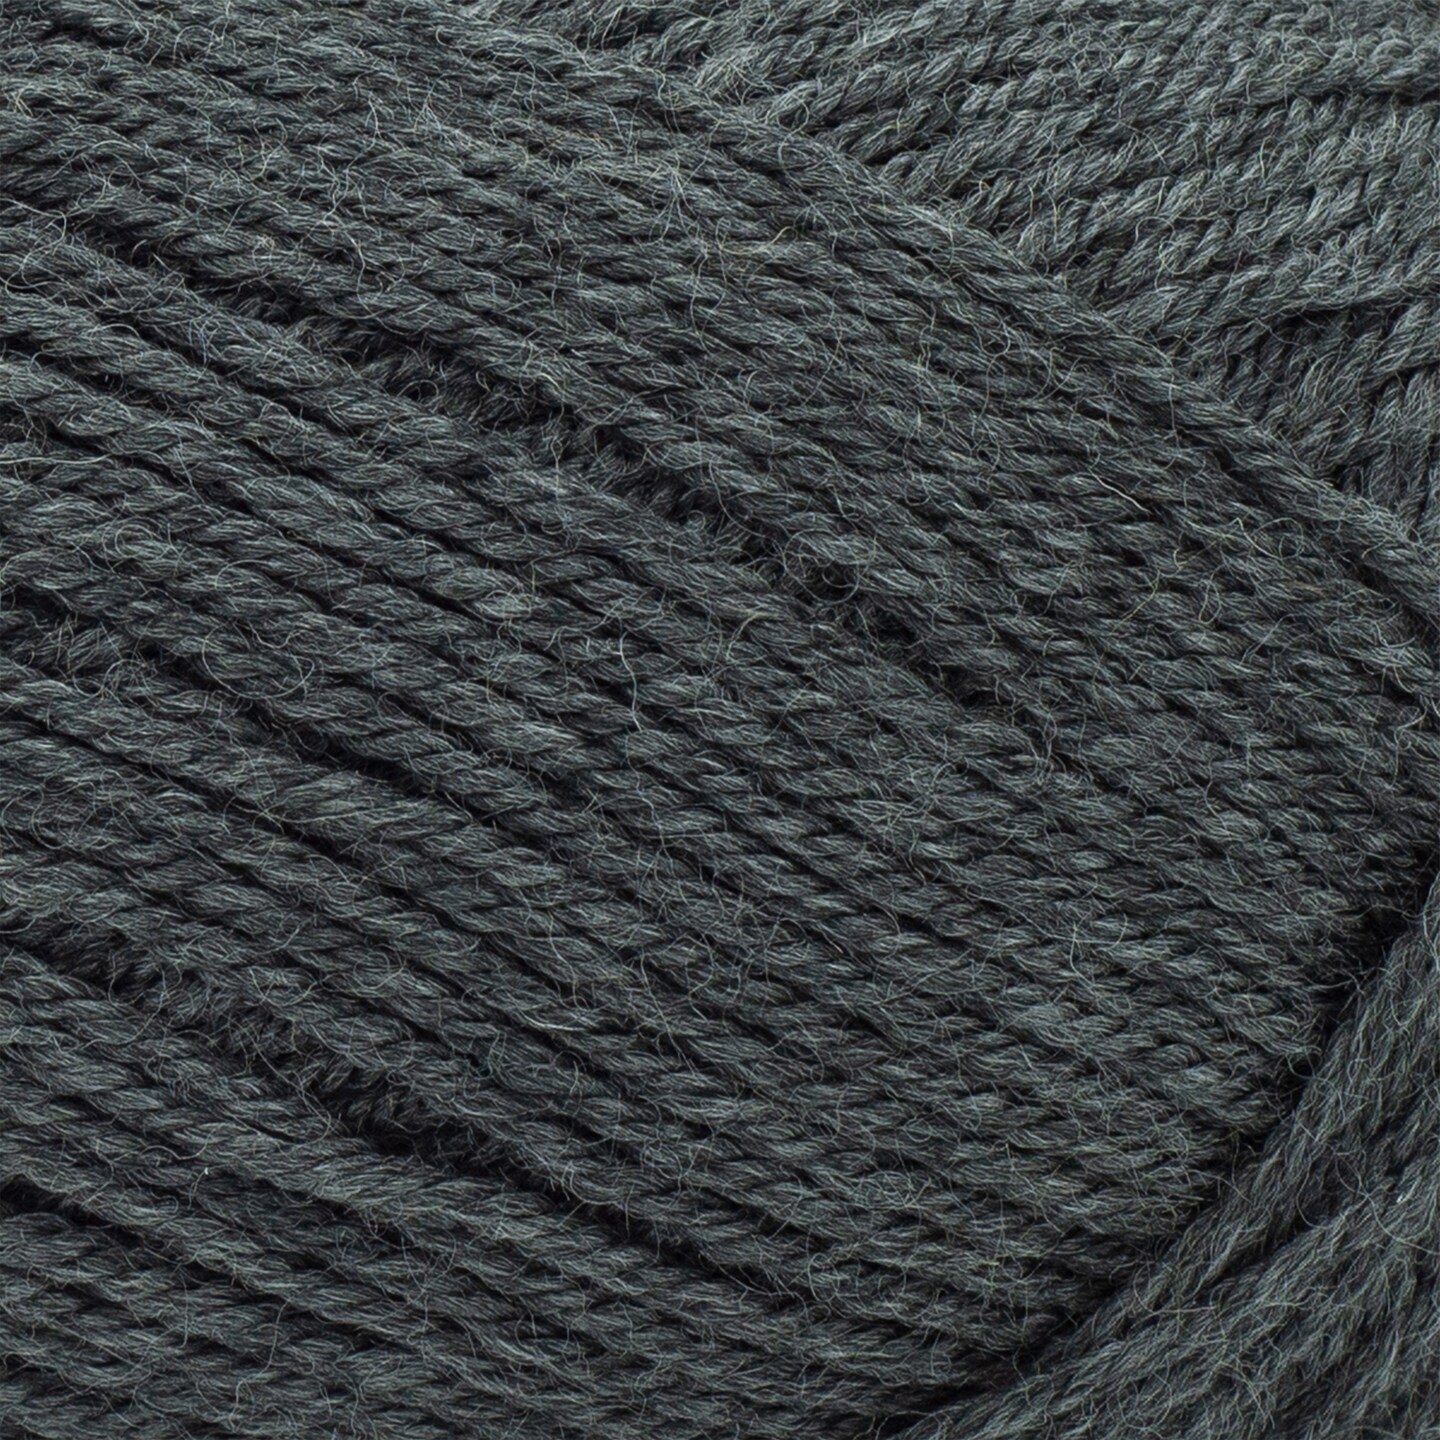 Wool Ease Recycled Yarn Review - New Lion Brand Yarn! 